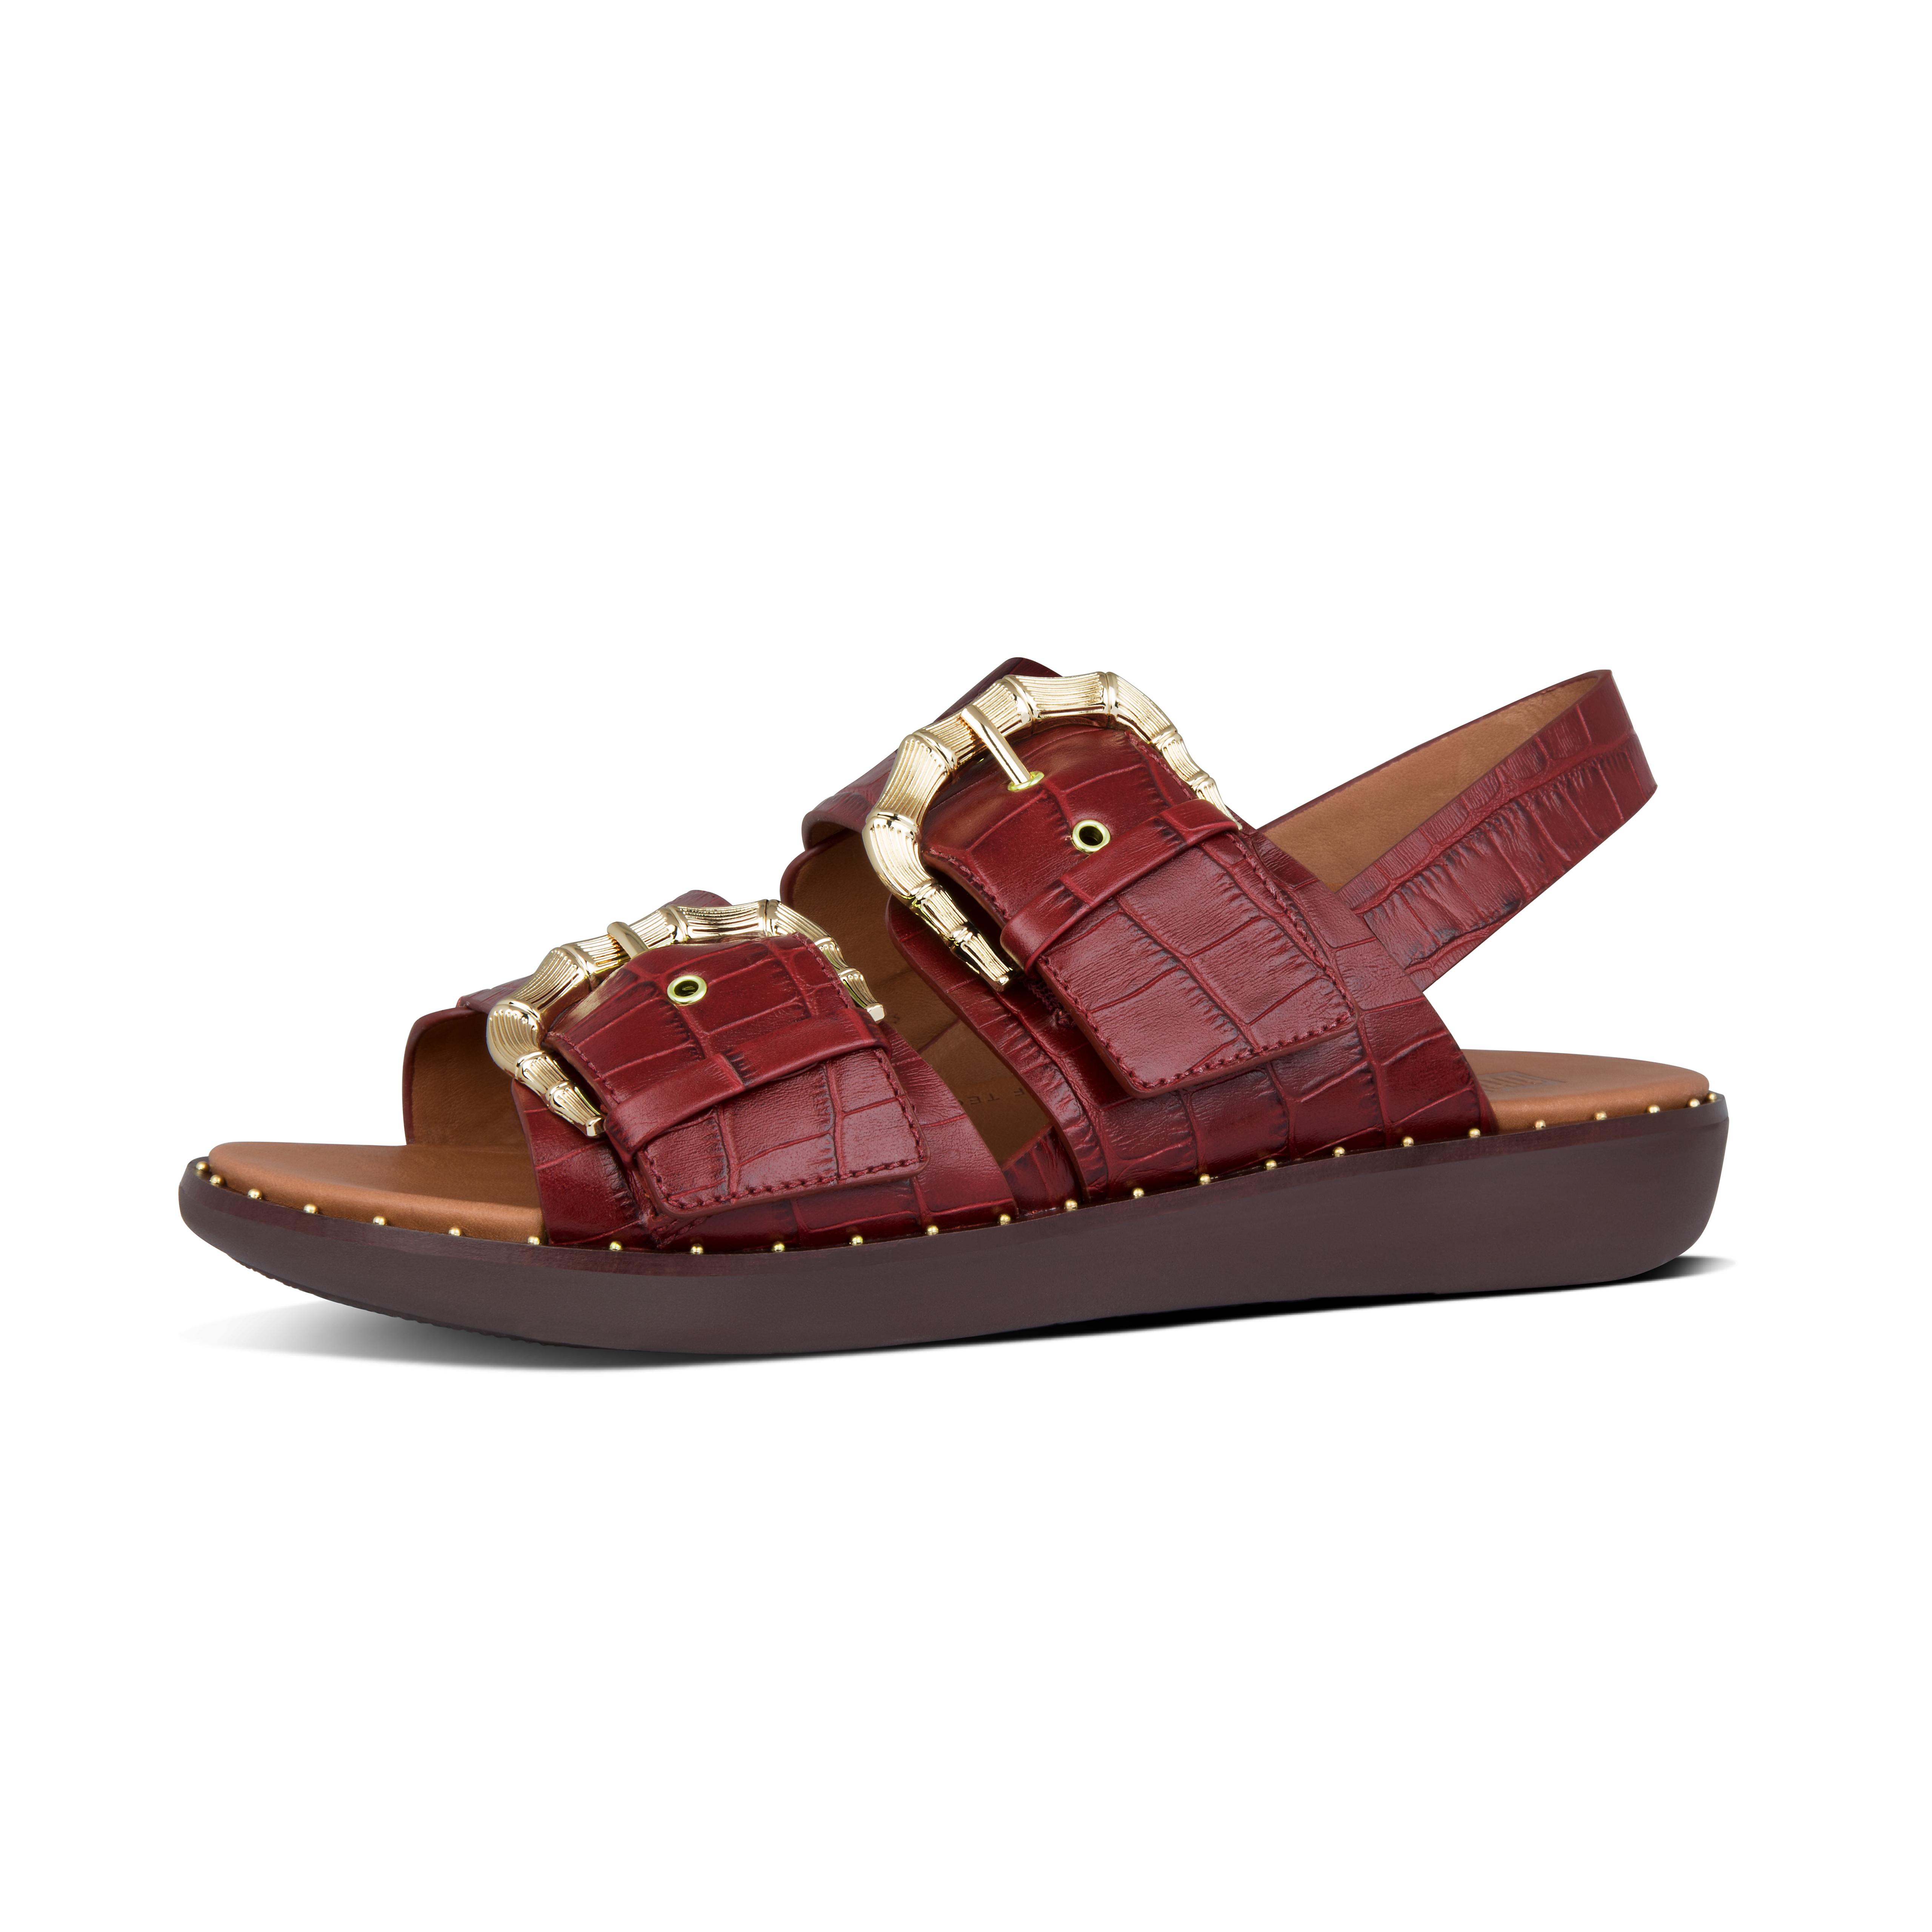 comfort sandals with backstrap